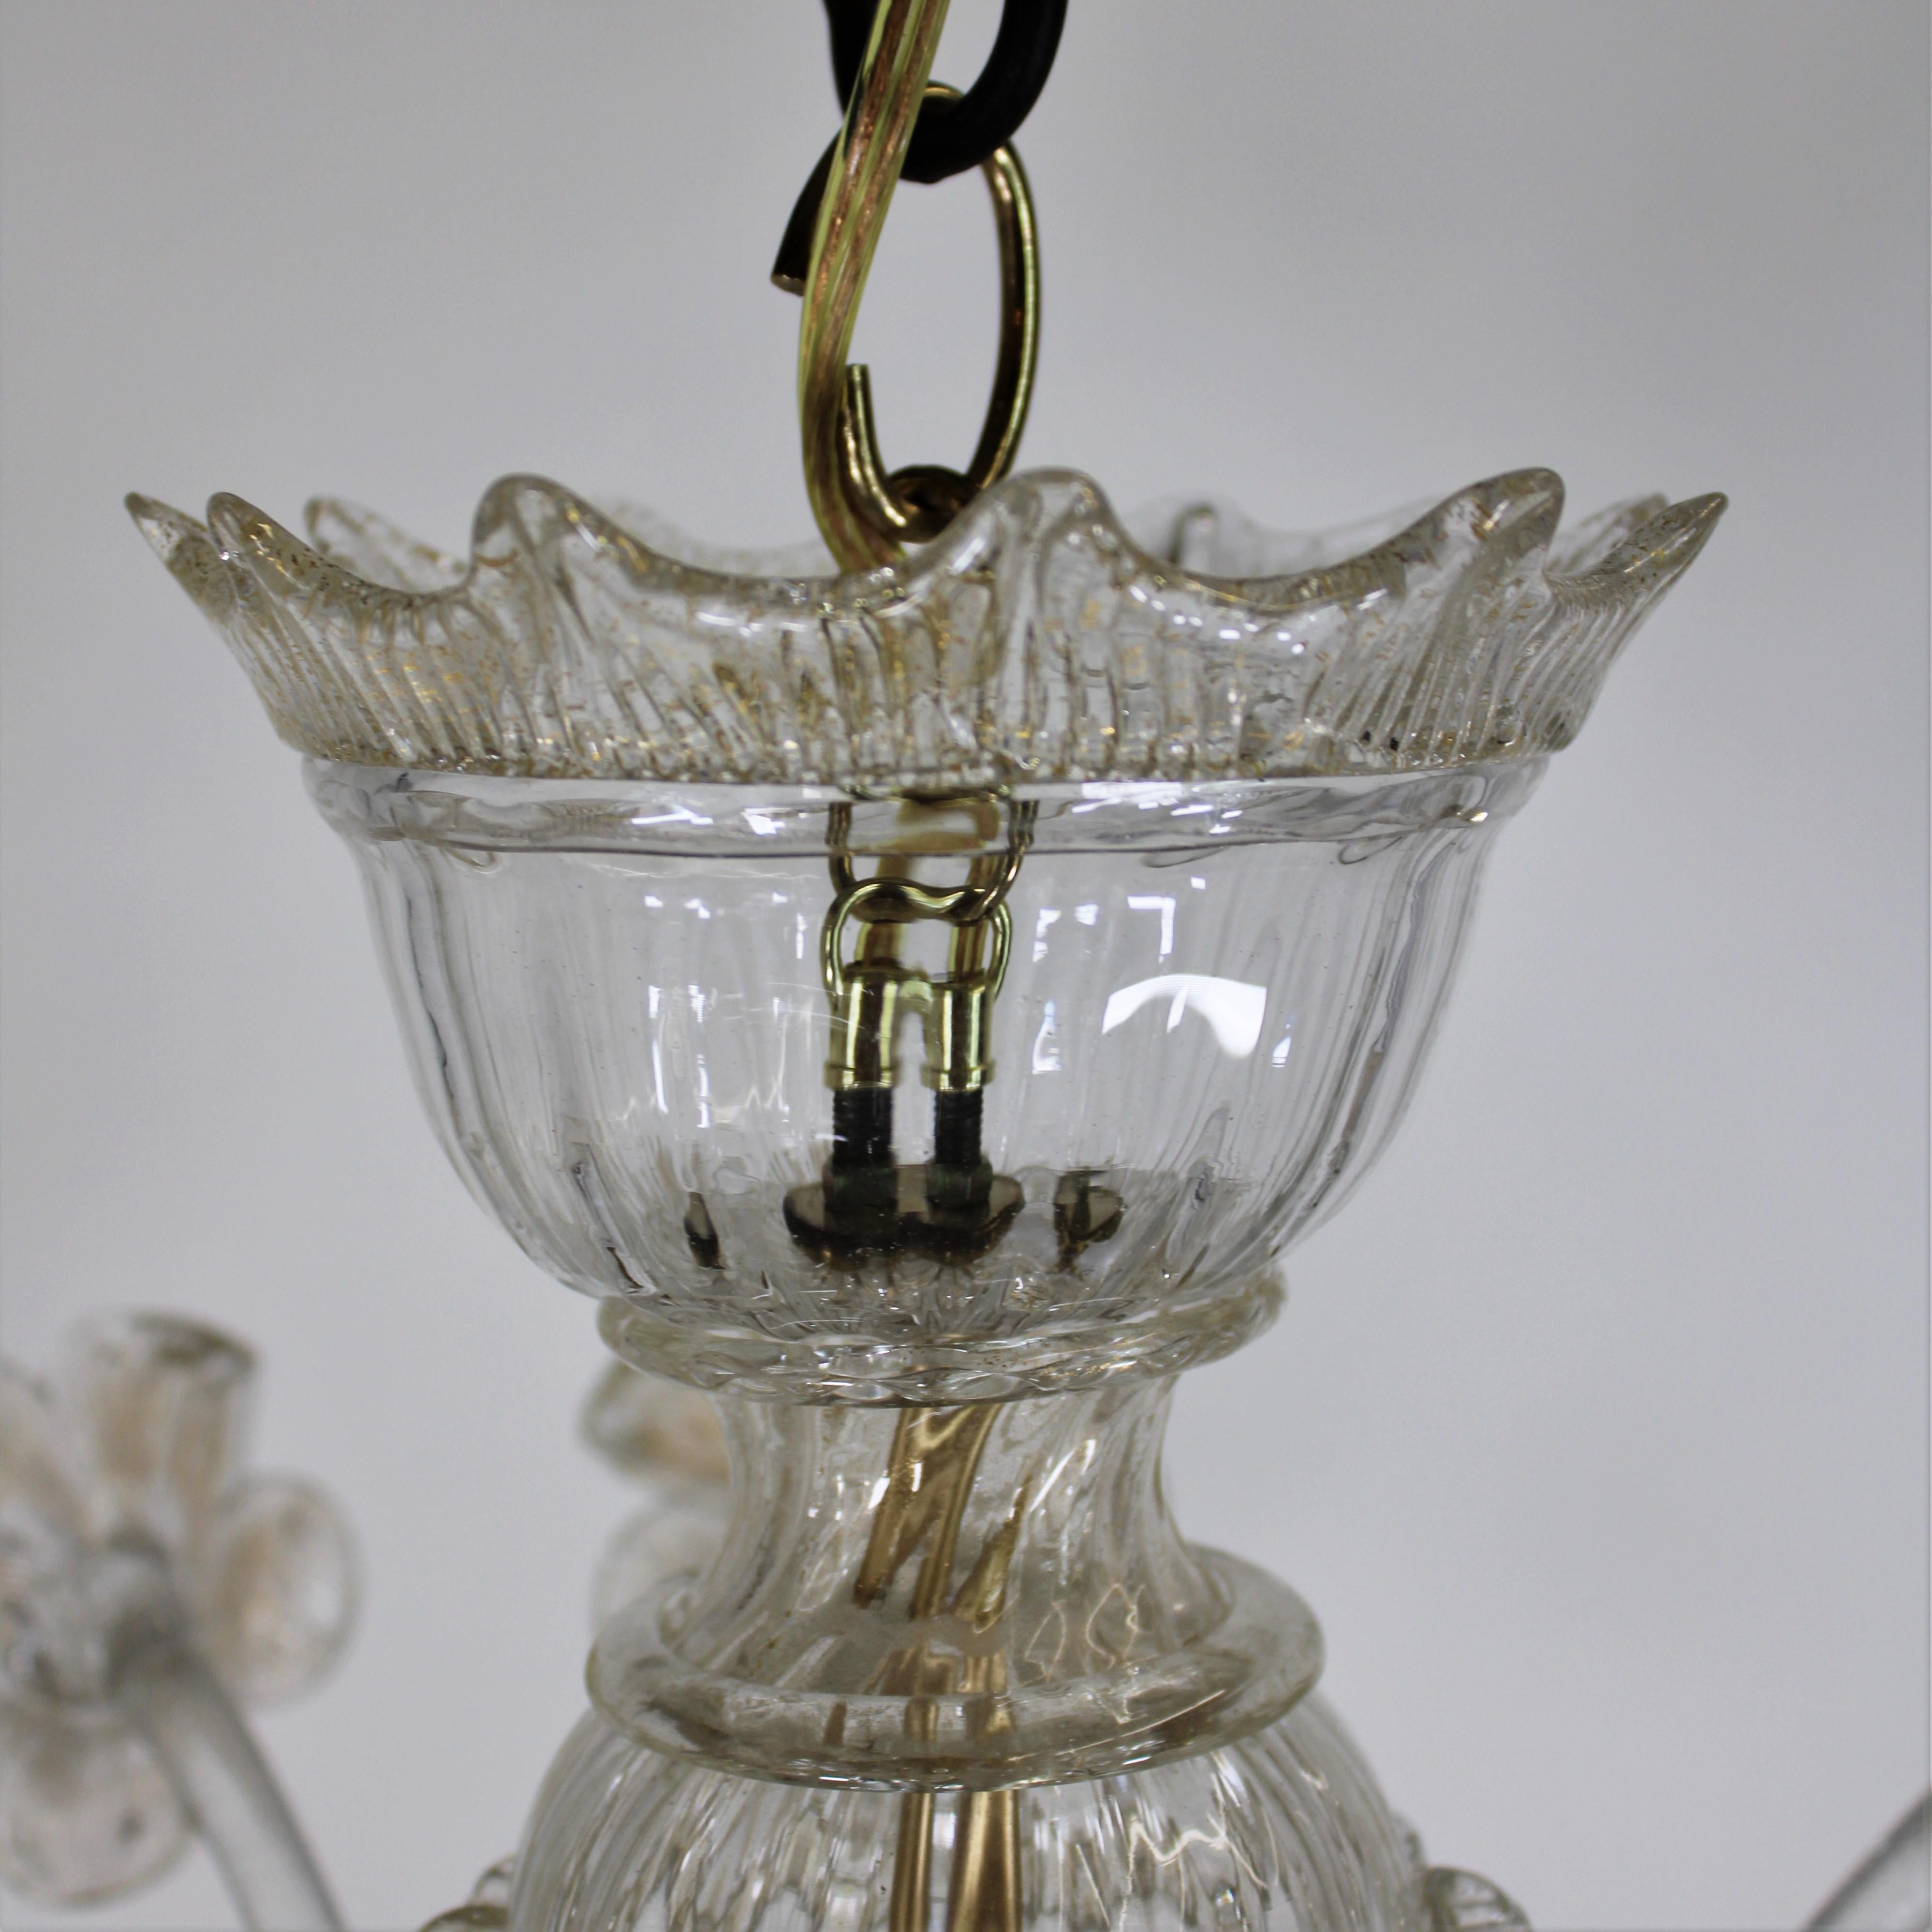 20th Century Vintage Baroque Style Five Arm Gold Infused Cristallo Murano Glass Chandelier For Sale